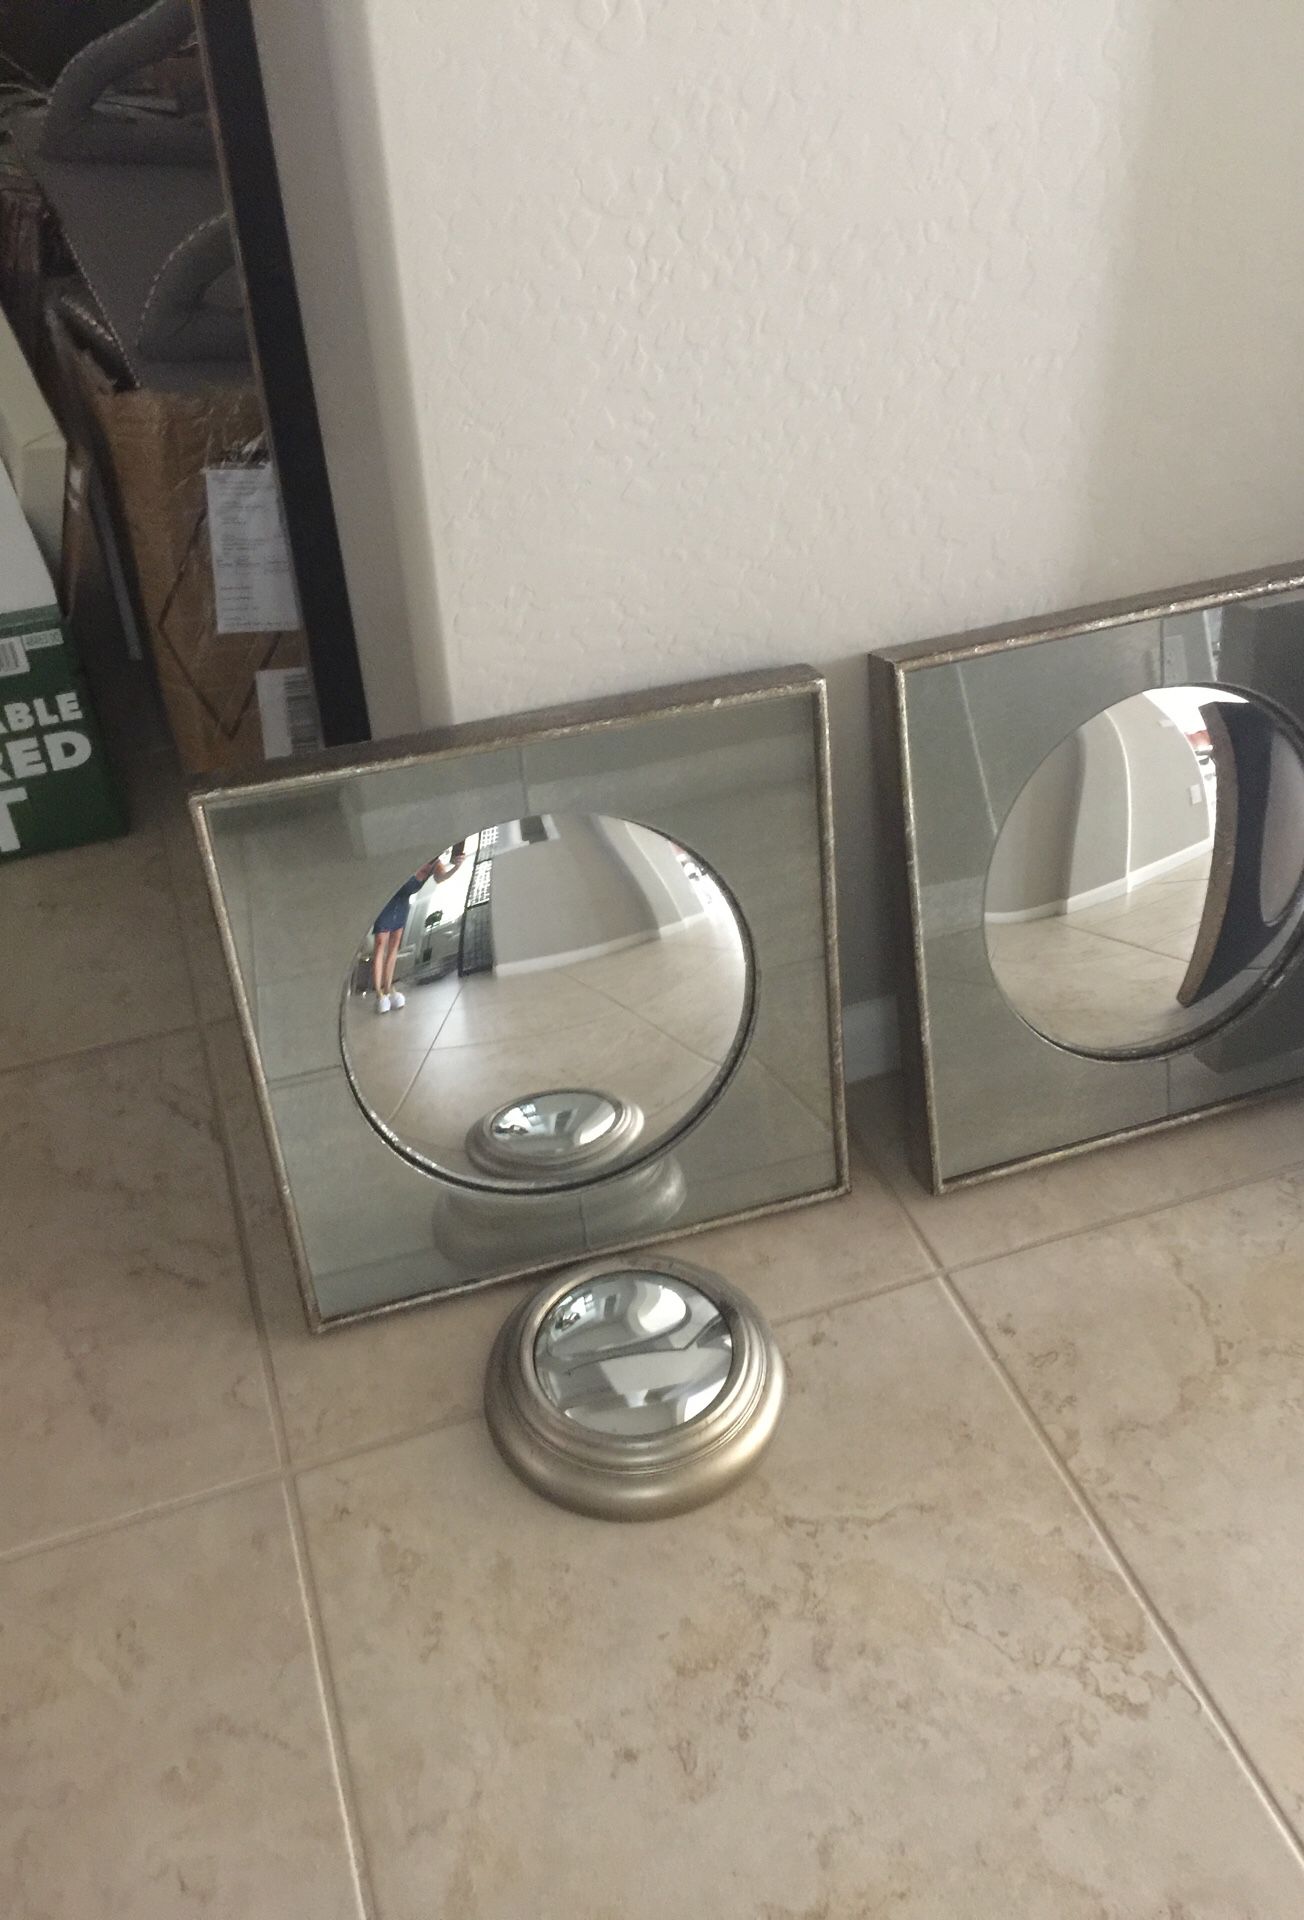 Set of 12 wall hangings mirrors, 4 mirrors 16x16